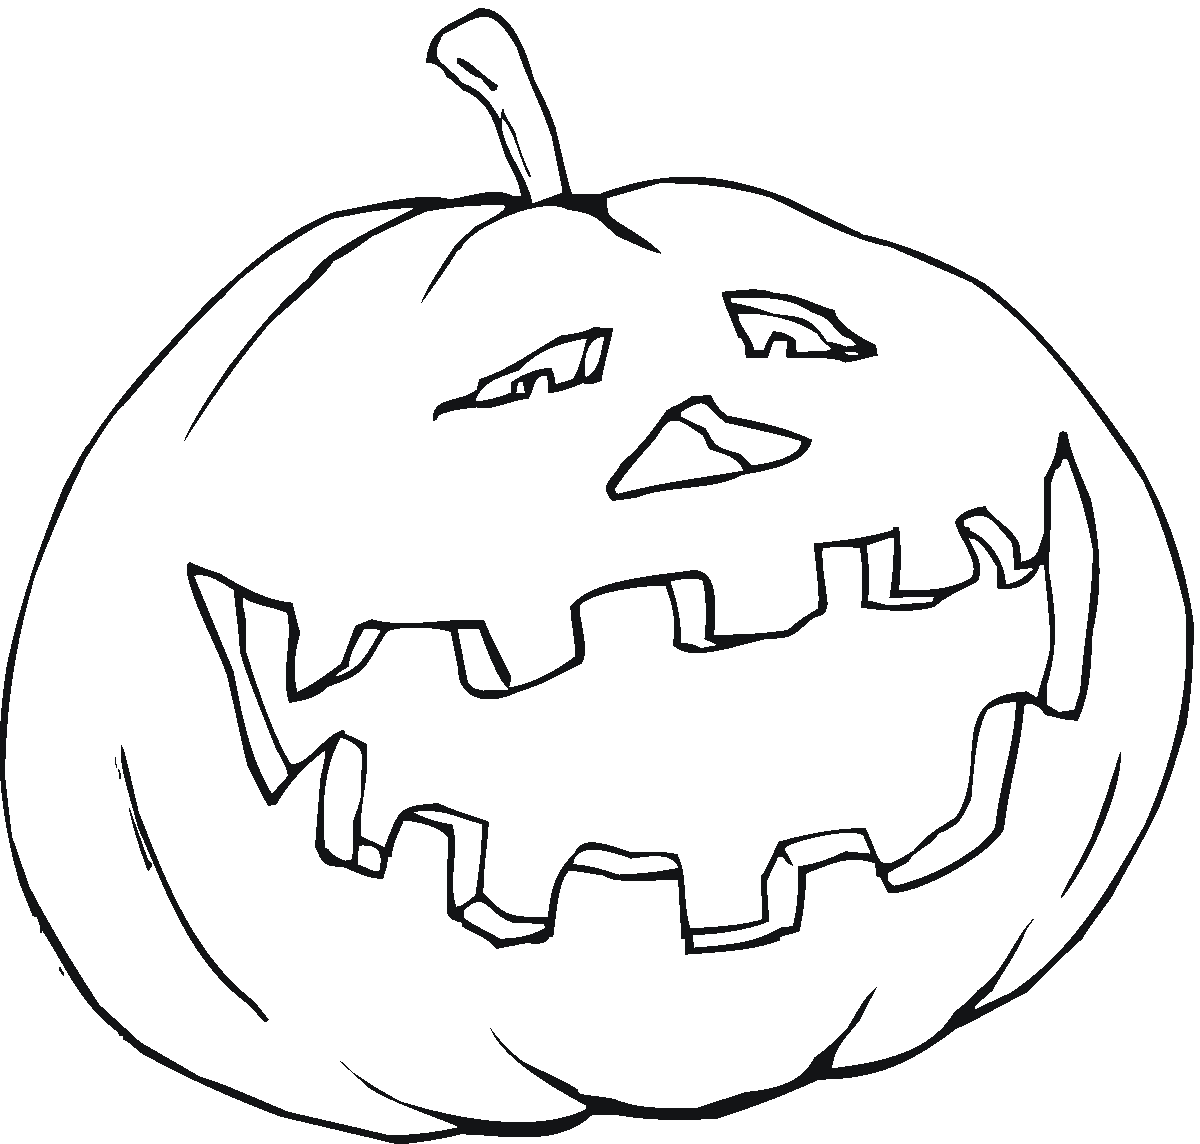 images of pumpkins to color free printable pumpkin coloring pages for kids of color images to pumpkins 